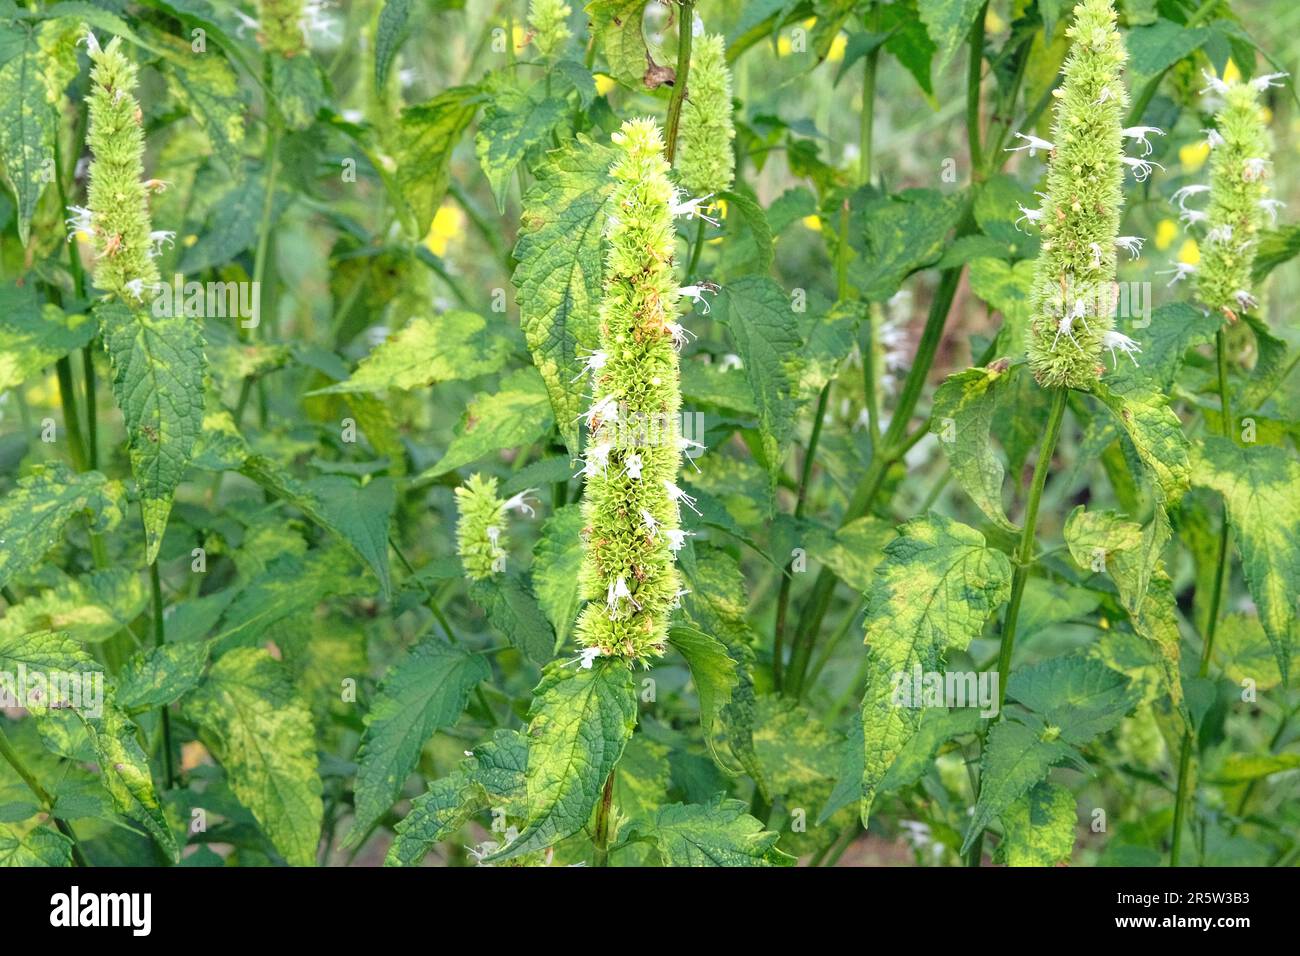 Anise hyssop. Hyssop of white color. Aromatic summer flowers on blurred background of green grass. Stock Photo